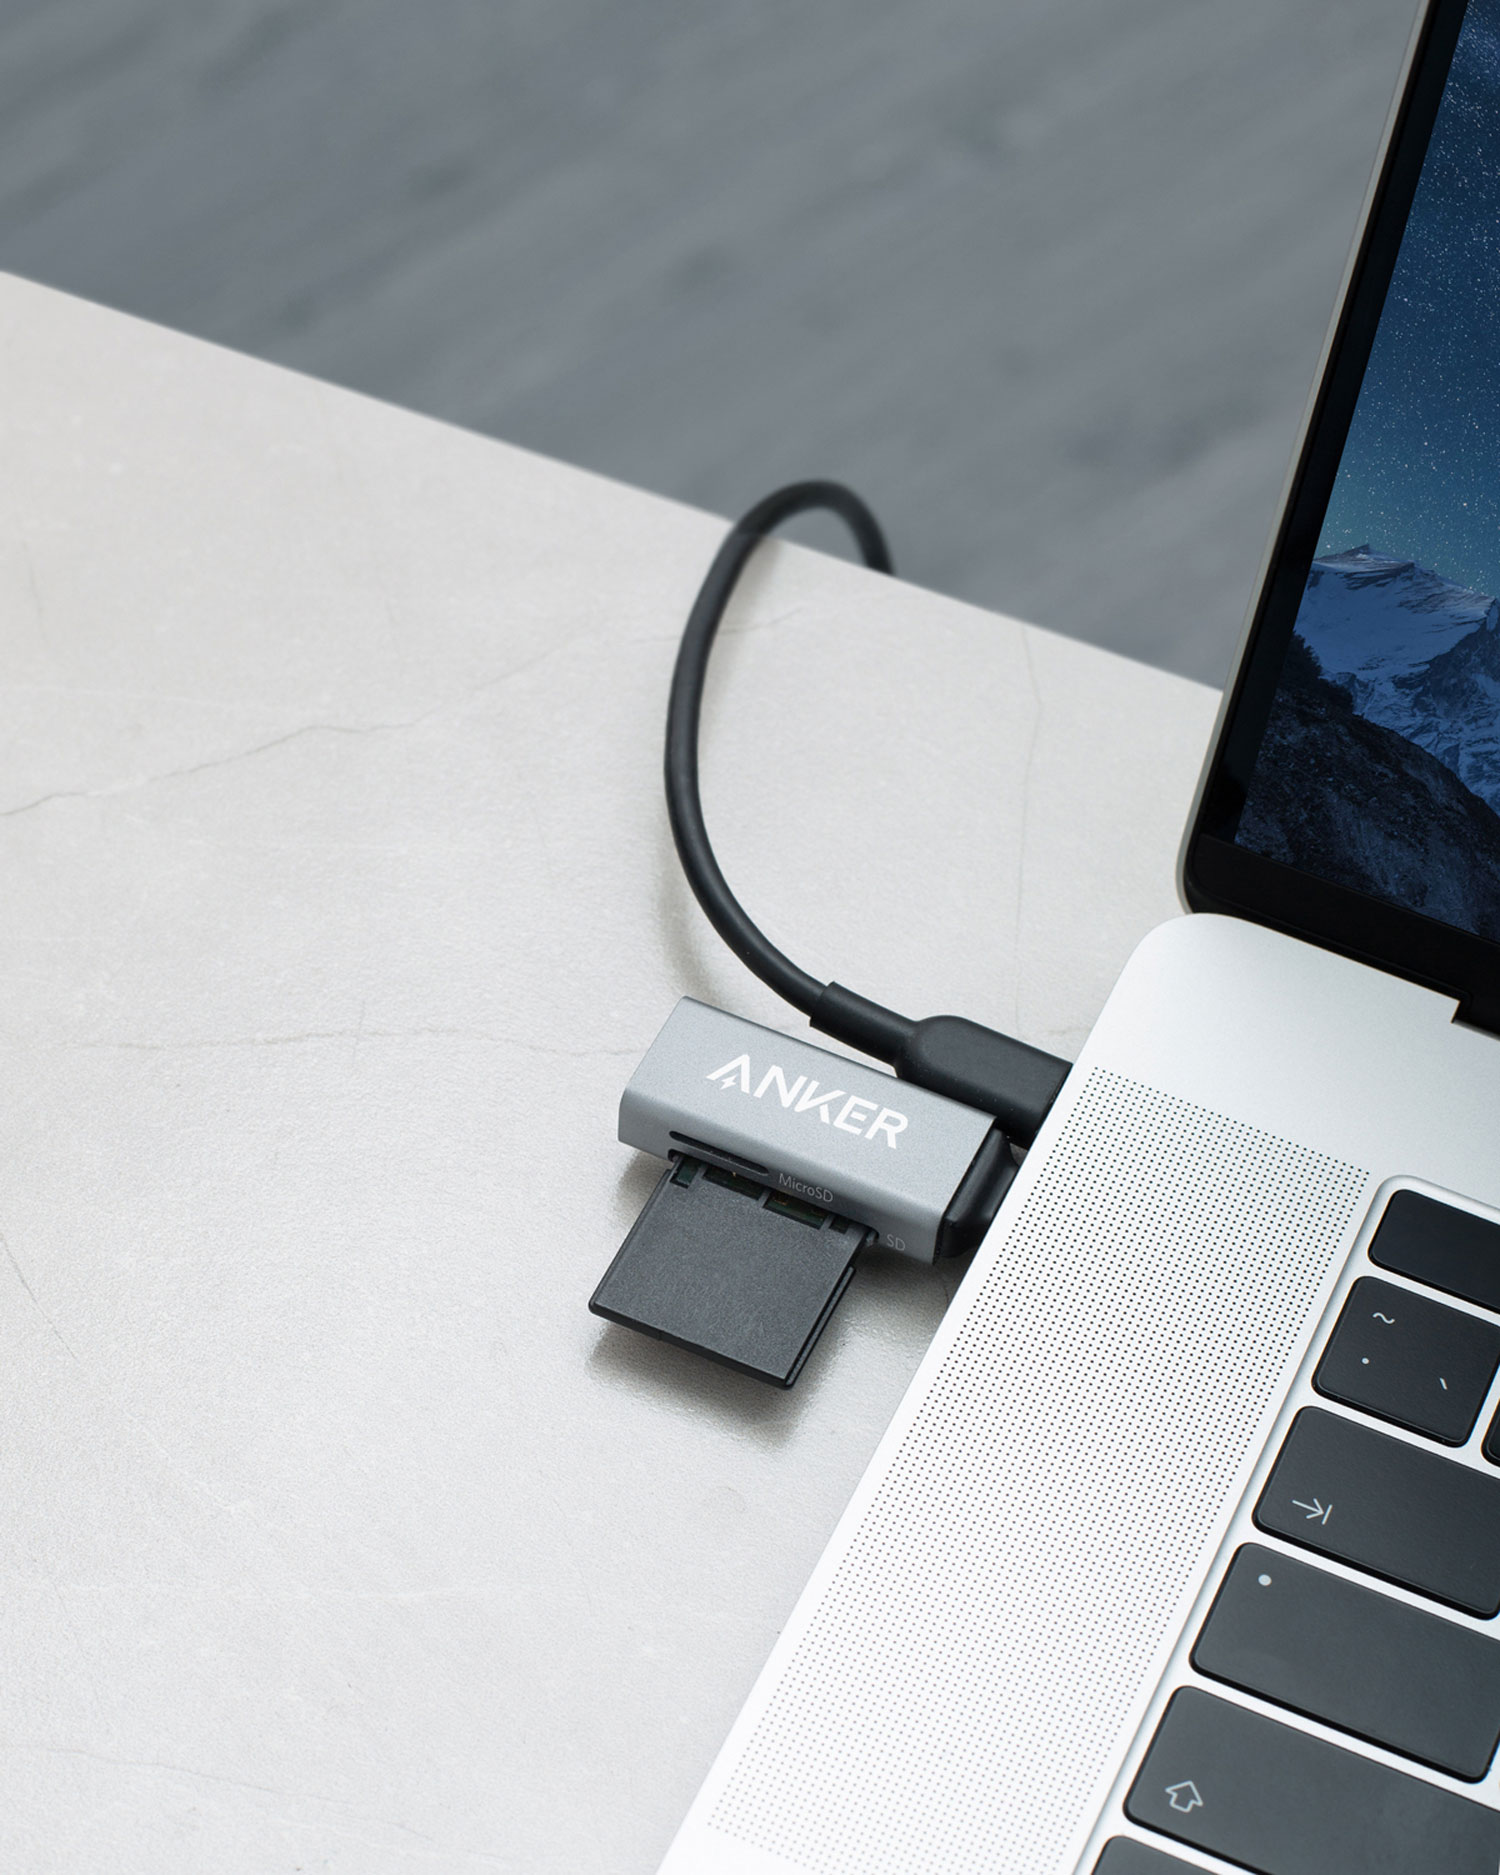 Anker 2-in-1 USB C to SD/Micro SD Card Reader - Anker Canada